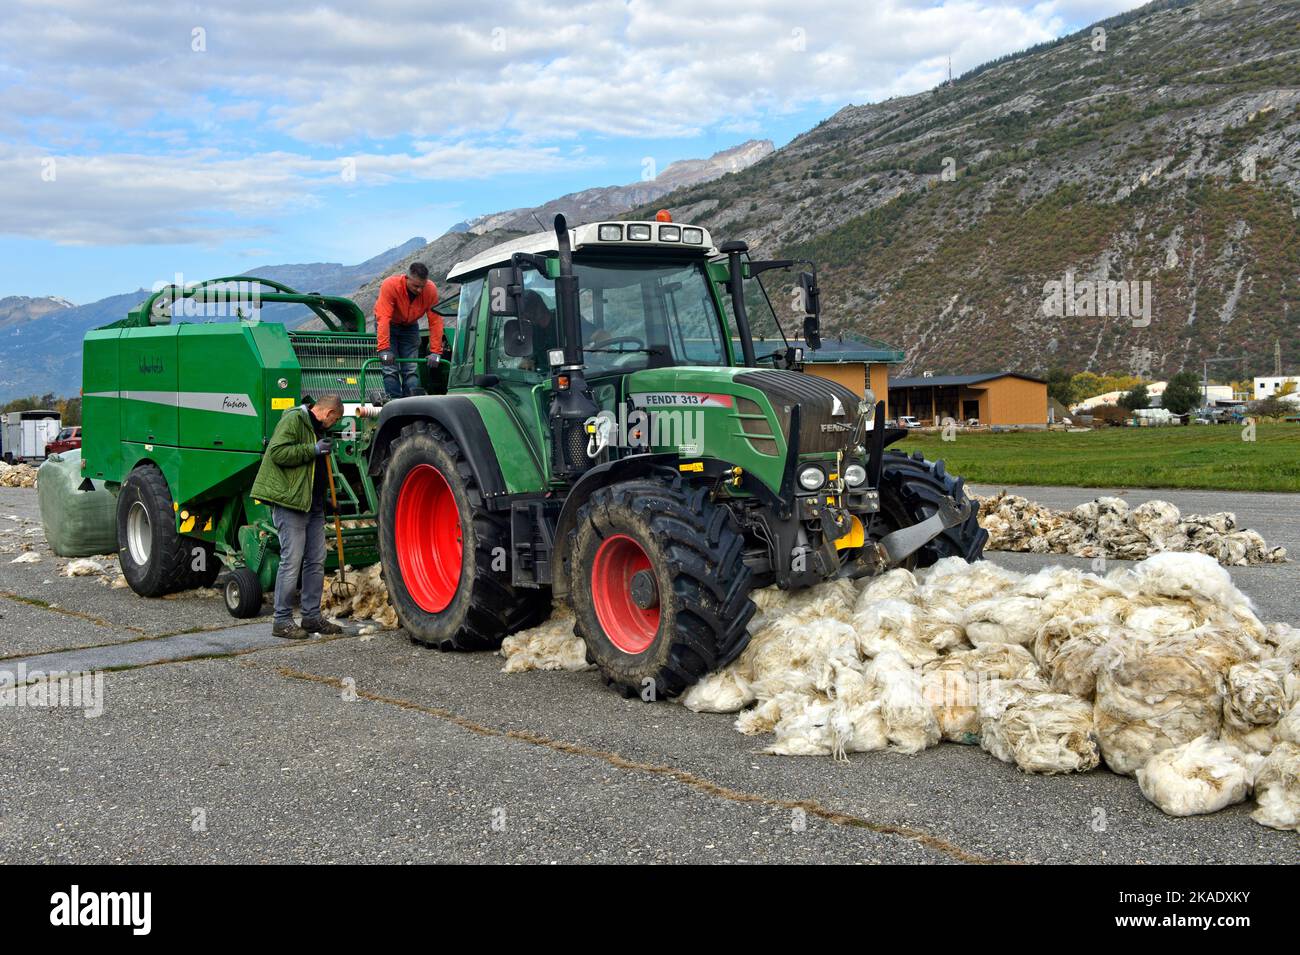 Tractor with round baler collecting sheep's wool, Swisswool collection point for virgin wool from Valais blacknose sheep, Turtmann, Valais,Switzerland Stock Photo